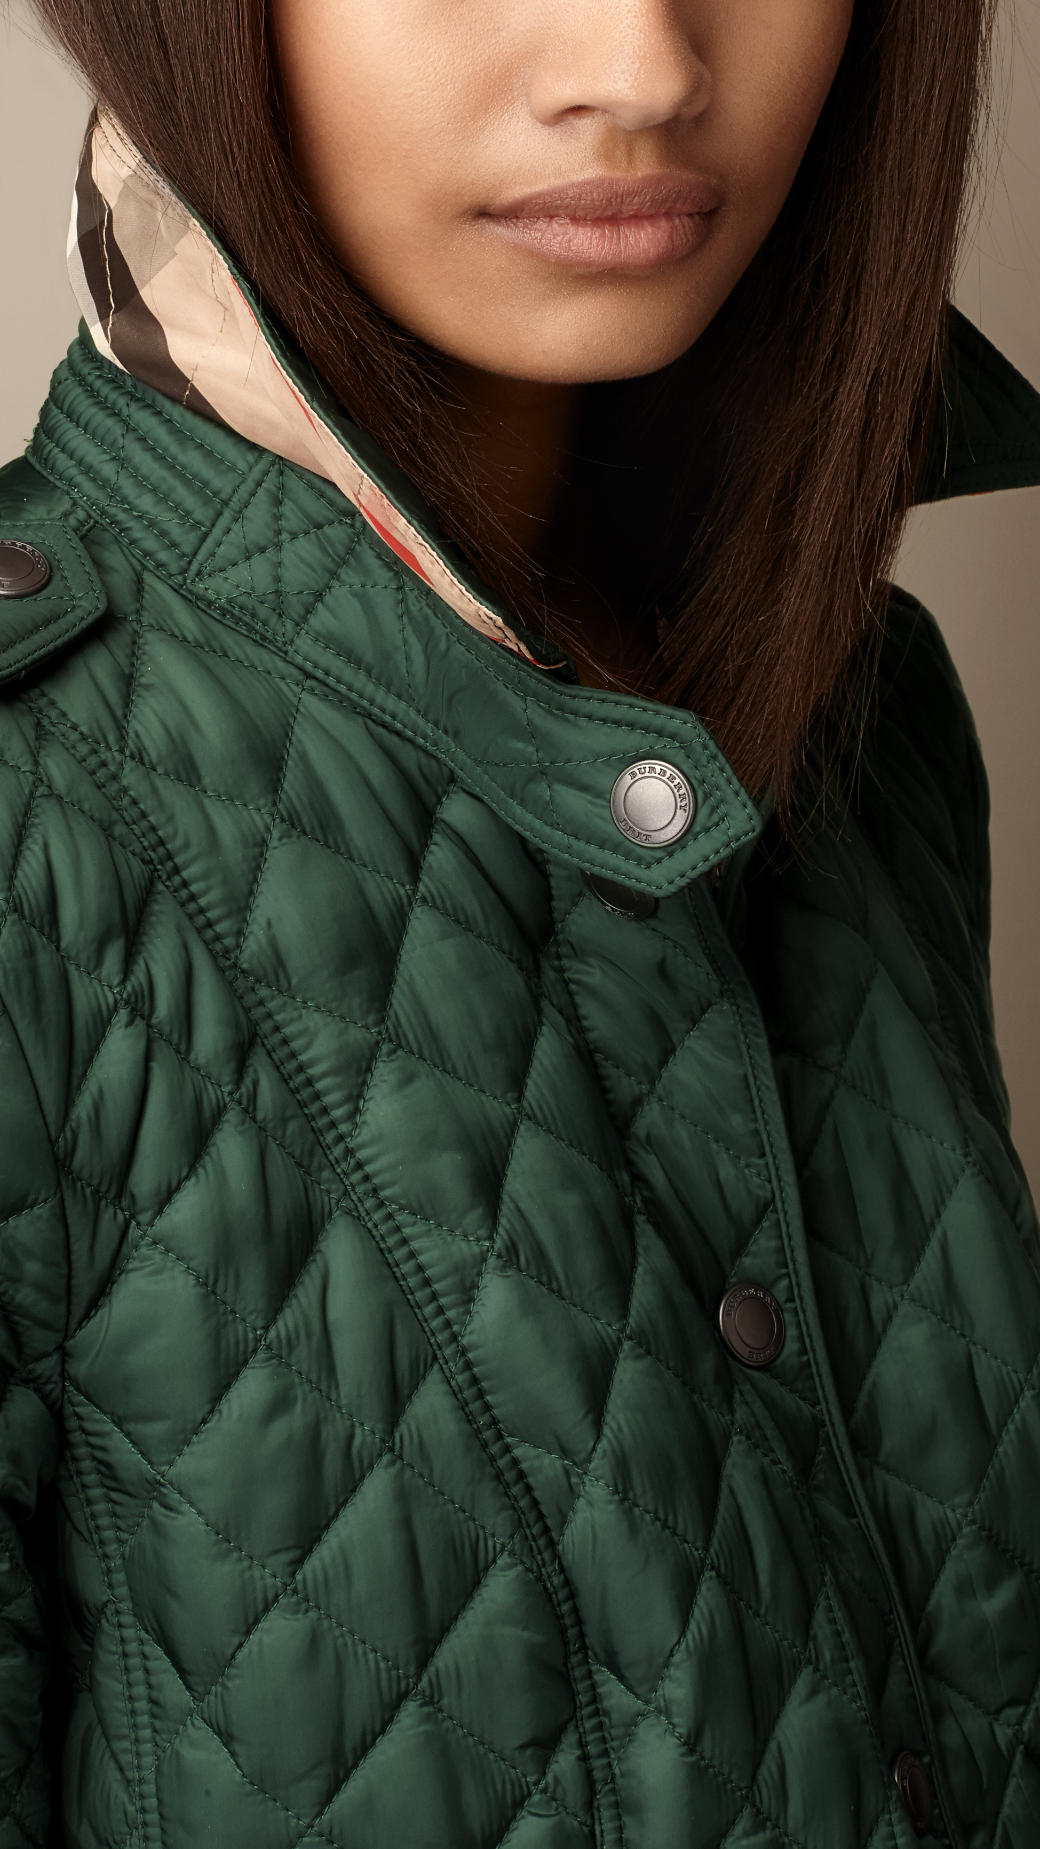 Burberry Heritage Quilted Jacket in Dark Racing Green (Green) - Lyst